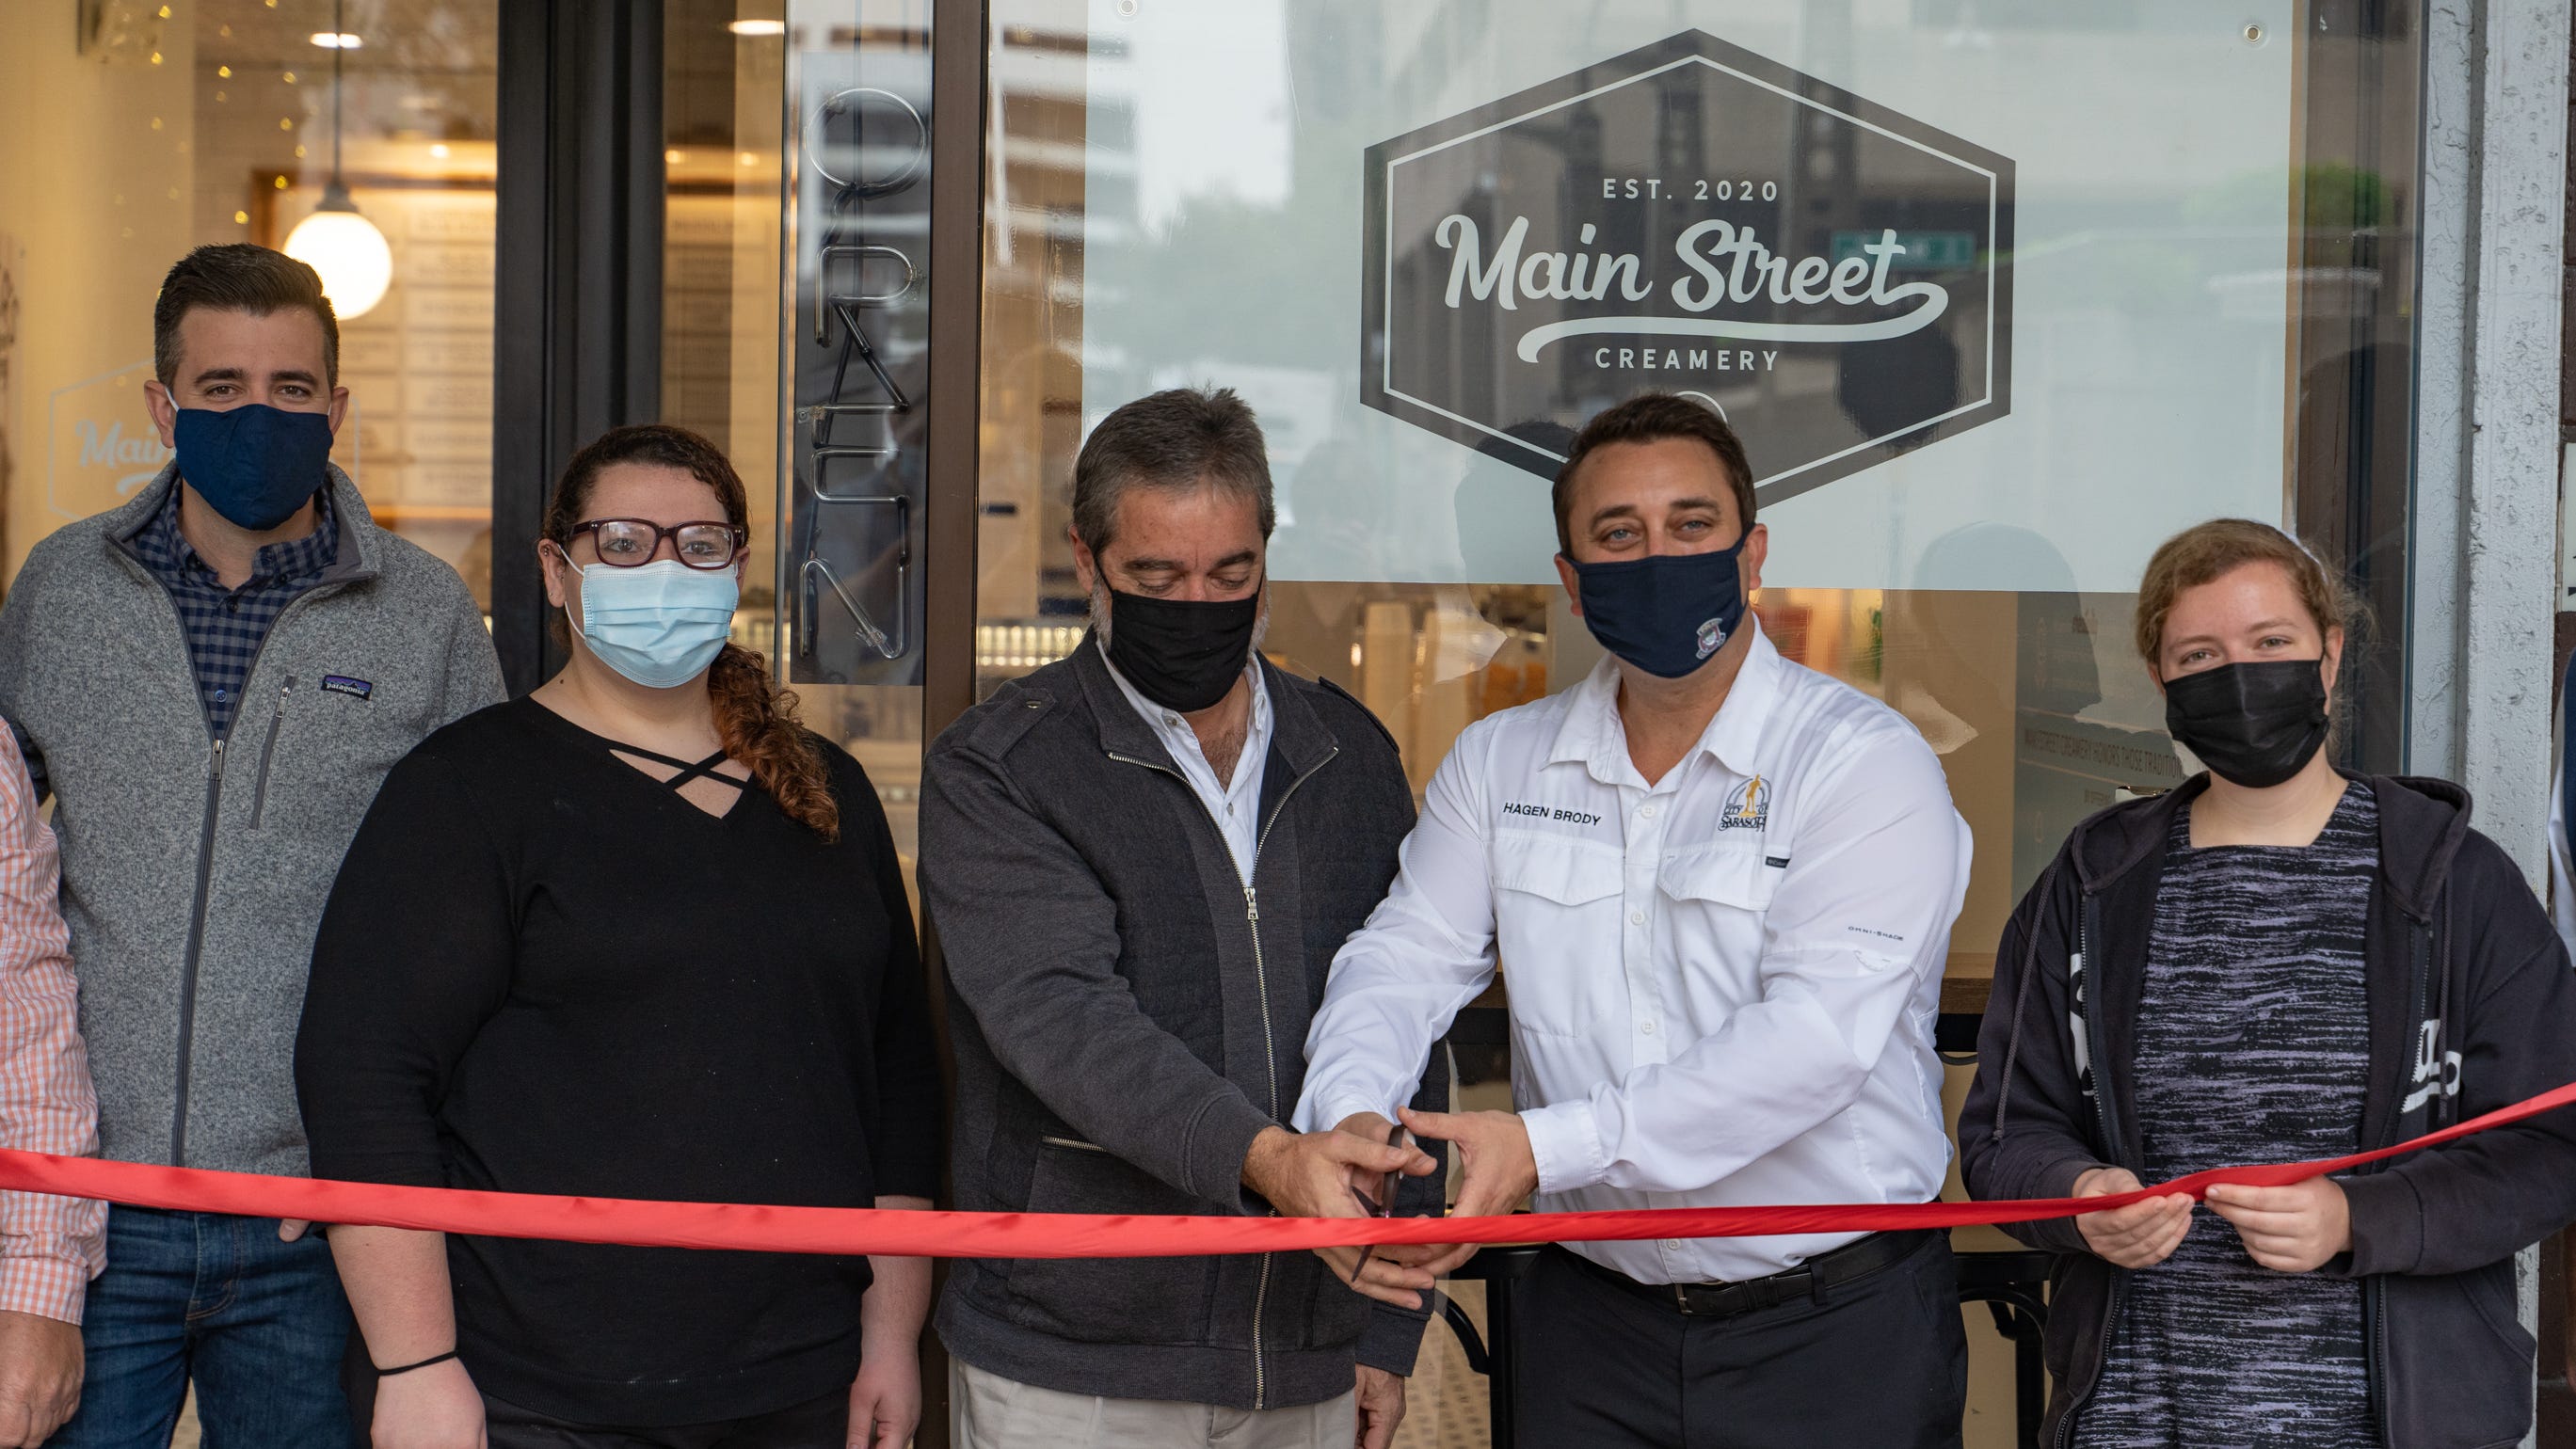 Ice cream shop Main Street Creamery is now open in downtown Sarasota, with Mayor Hagen Brody, second from right, attending a ribbon cutting.